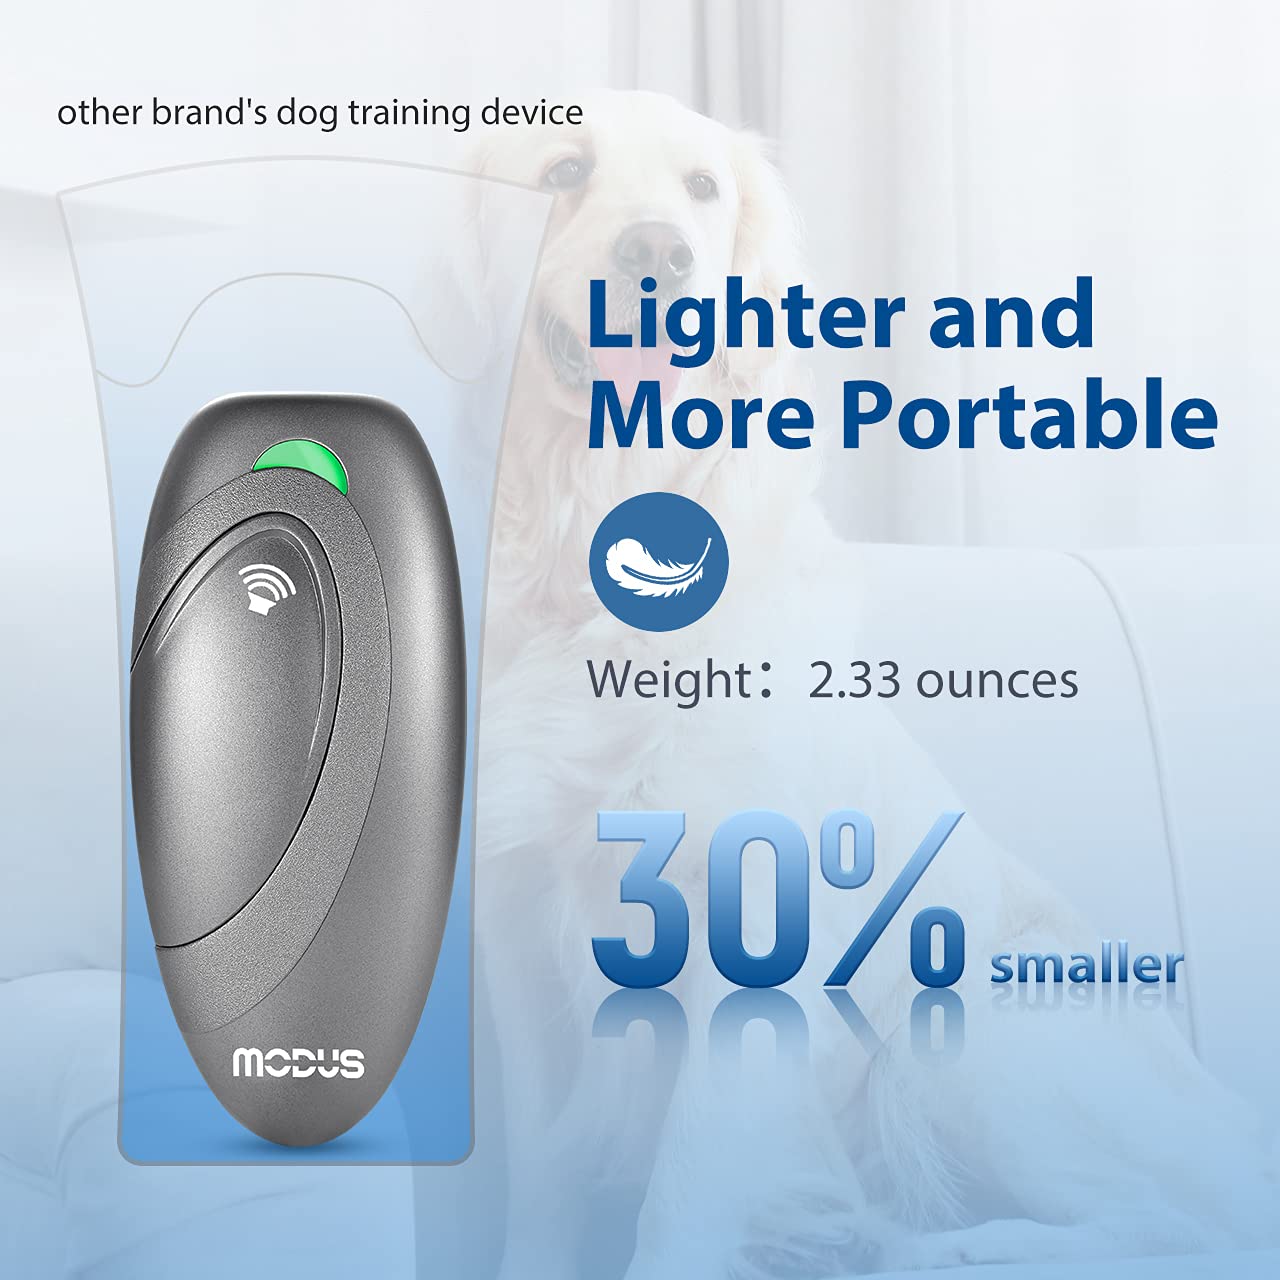 Modus - Anti Barking Device For Dogs - Q8OVL